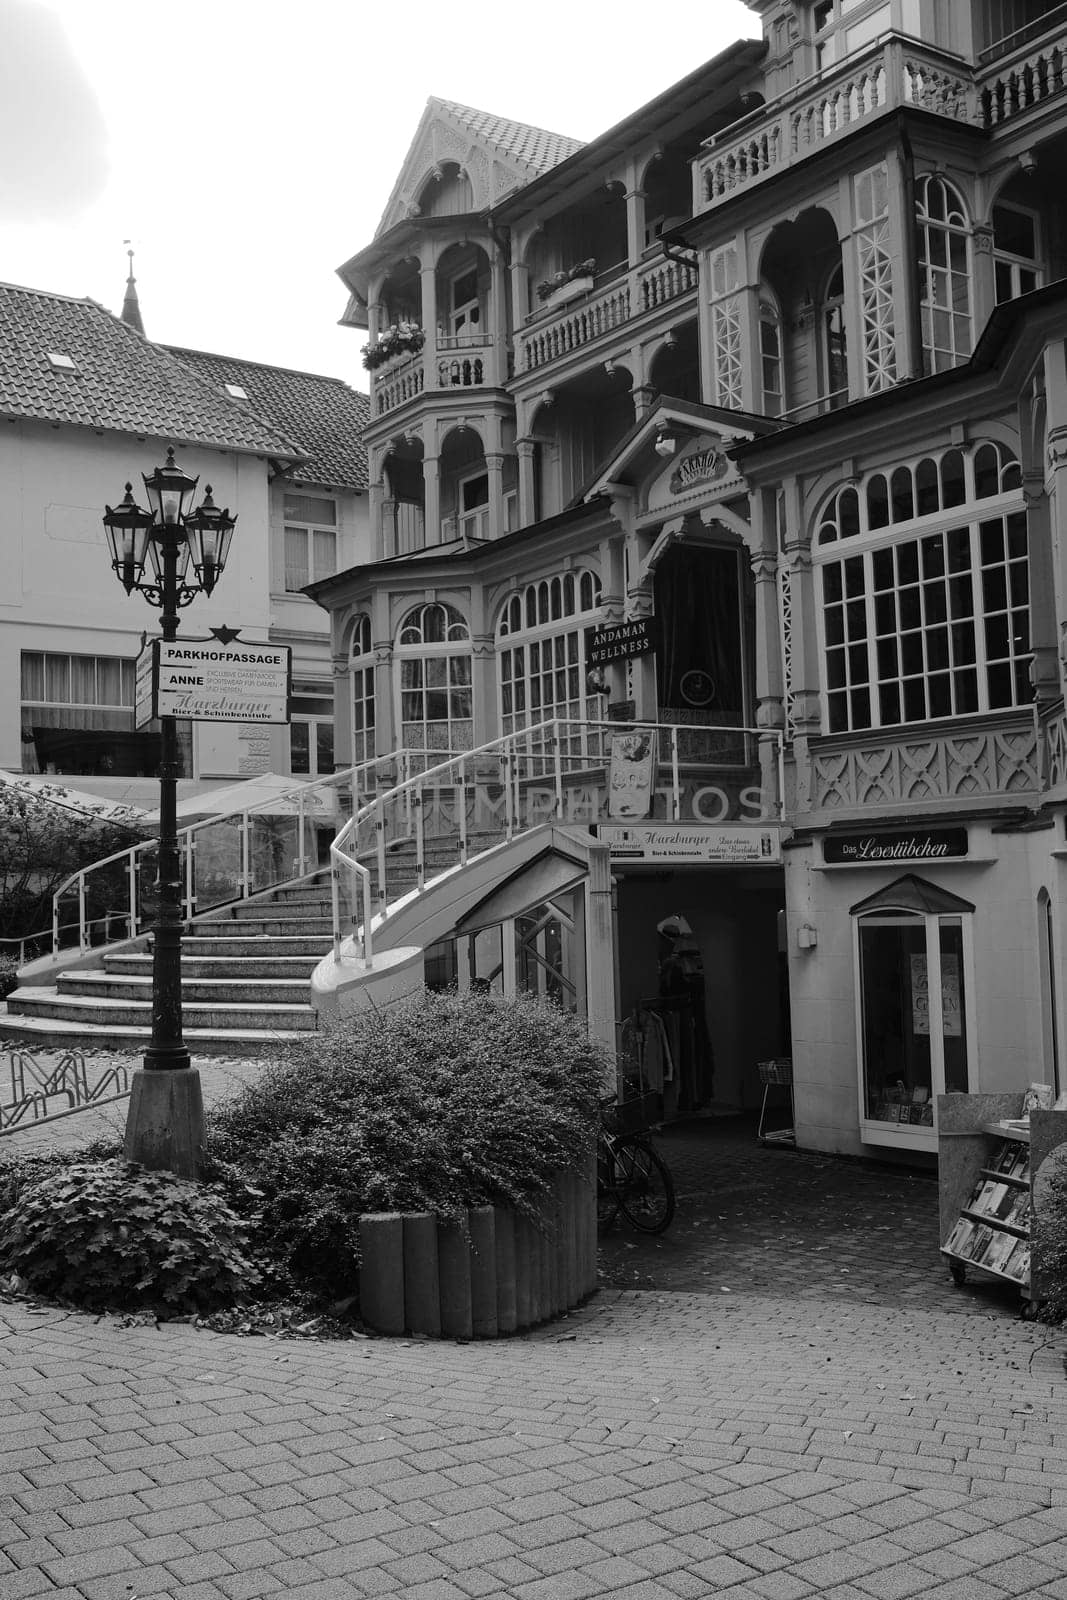 Vertical grayscale shot of a decorative classic villa in Bad Harzburg, Germany by rherrmannde